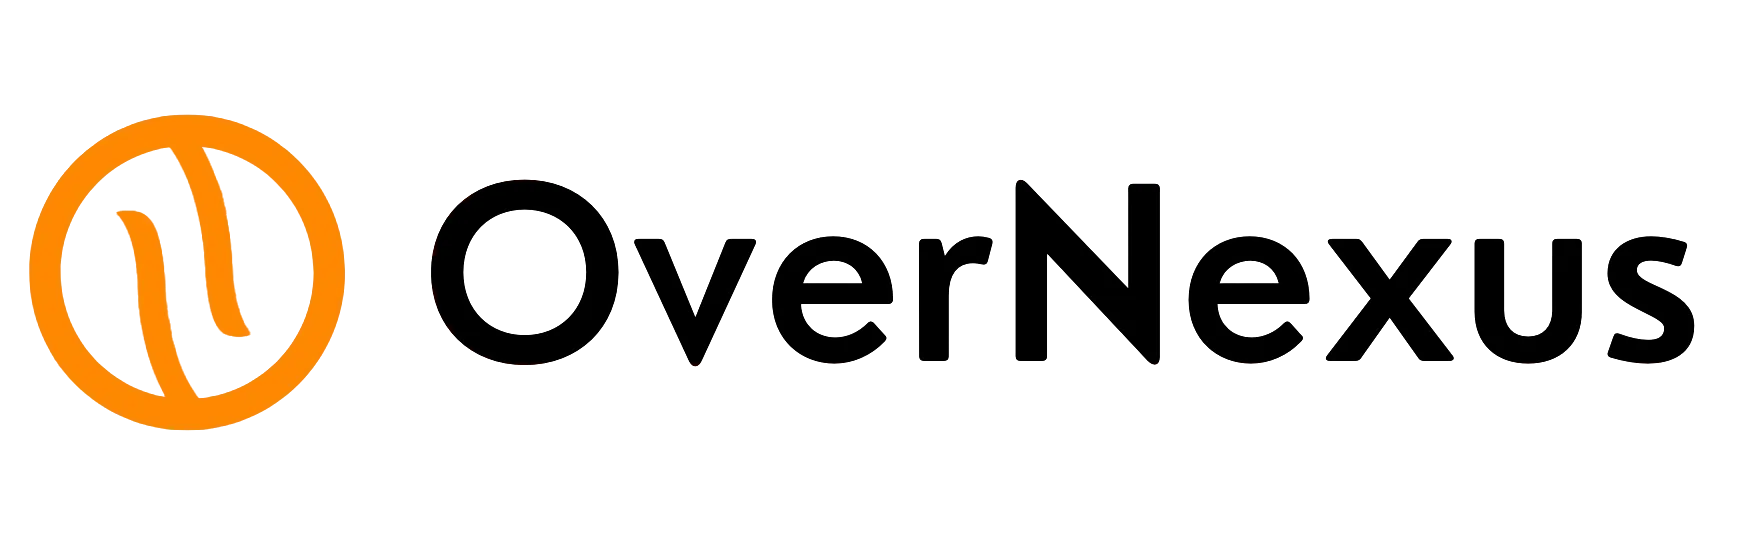 OverNexus official logo